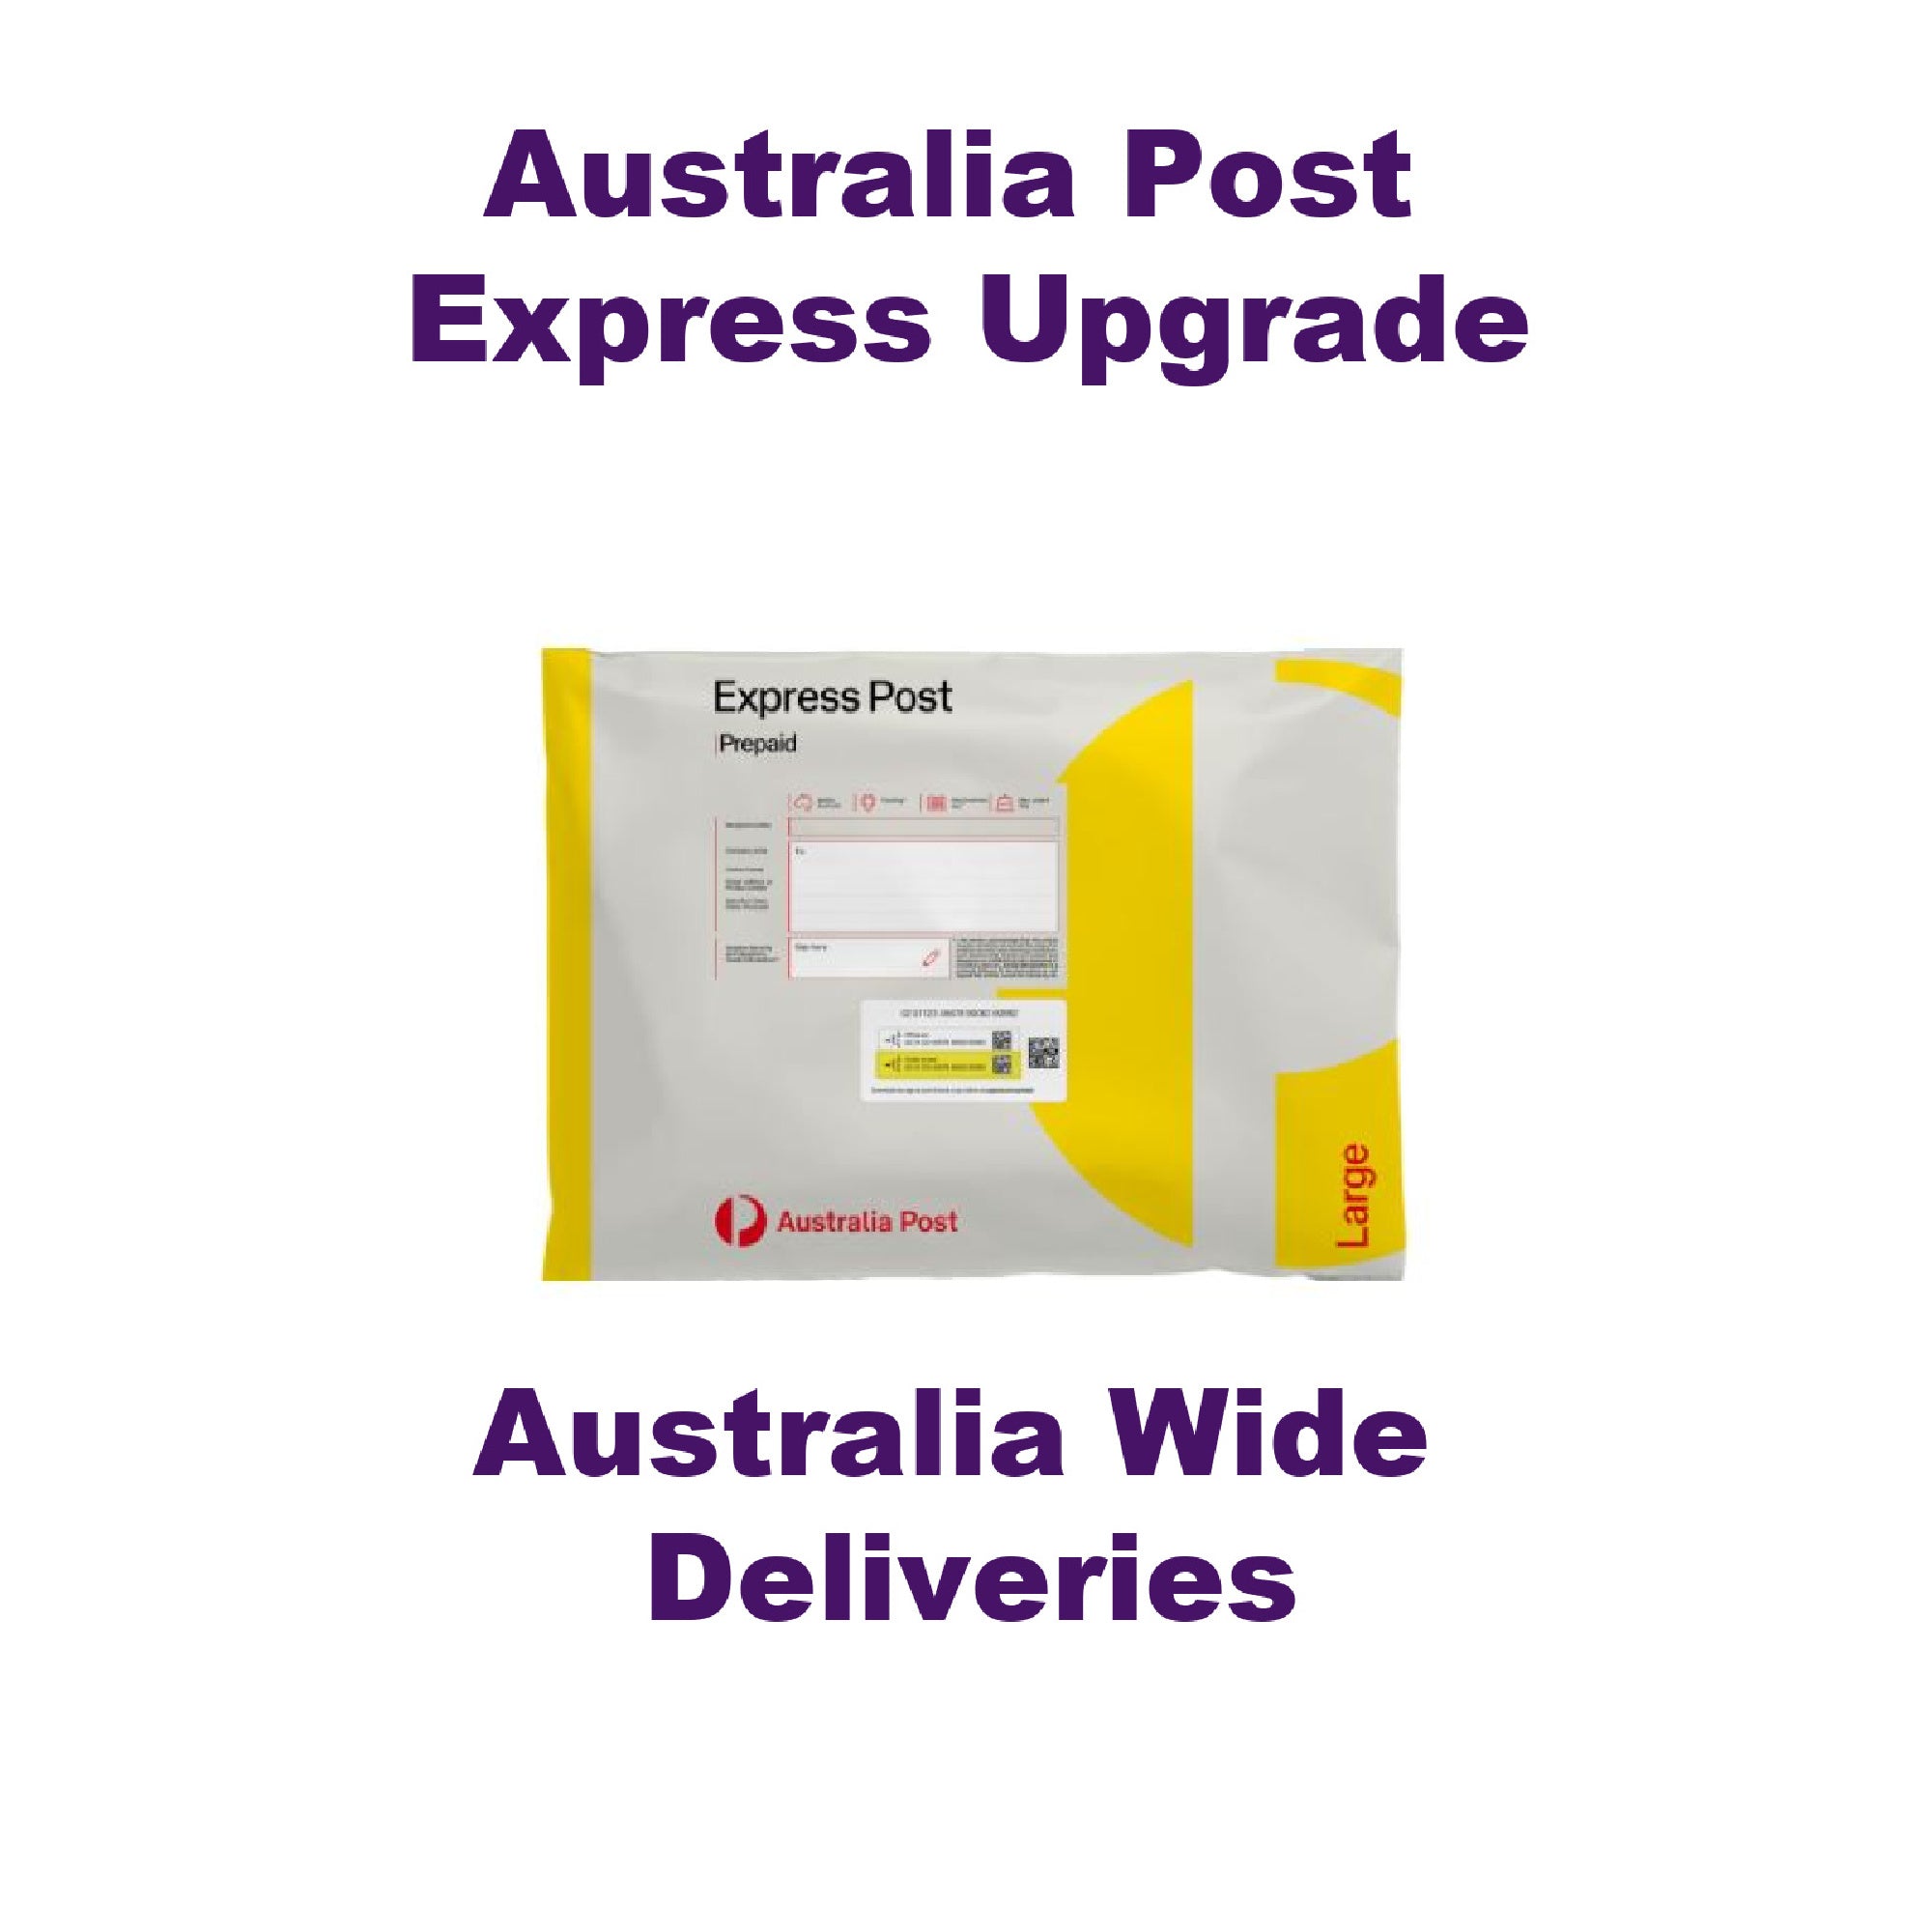 Aus Post Express Postage Upgrade - only for deliveries within Australia